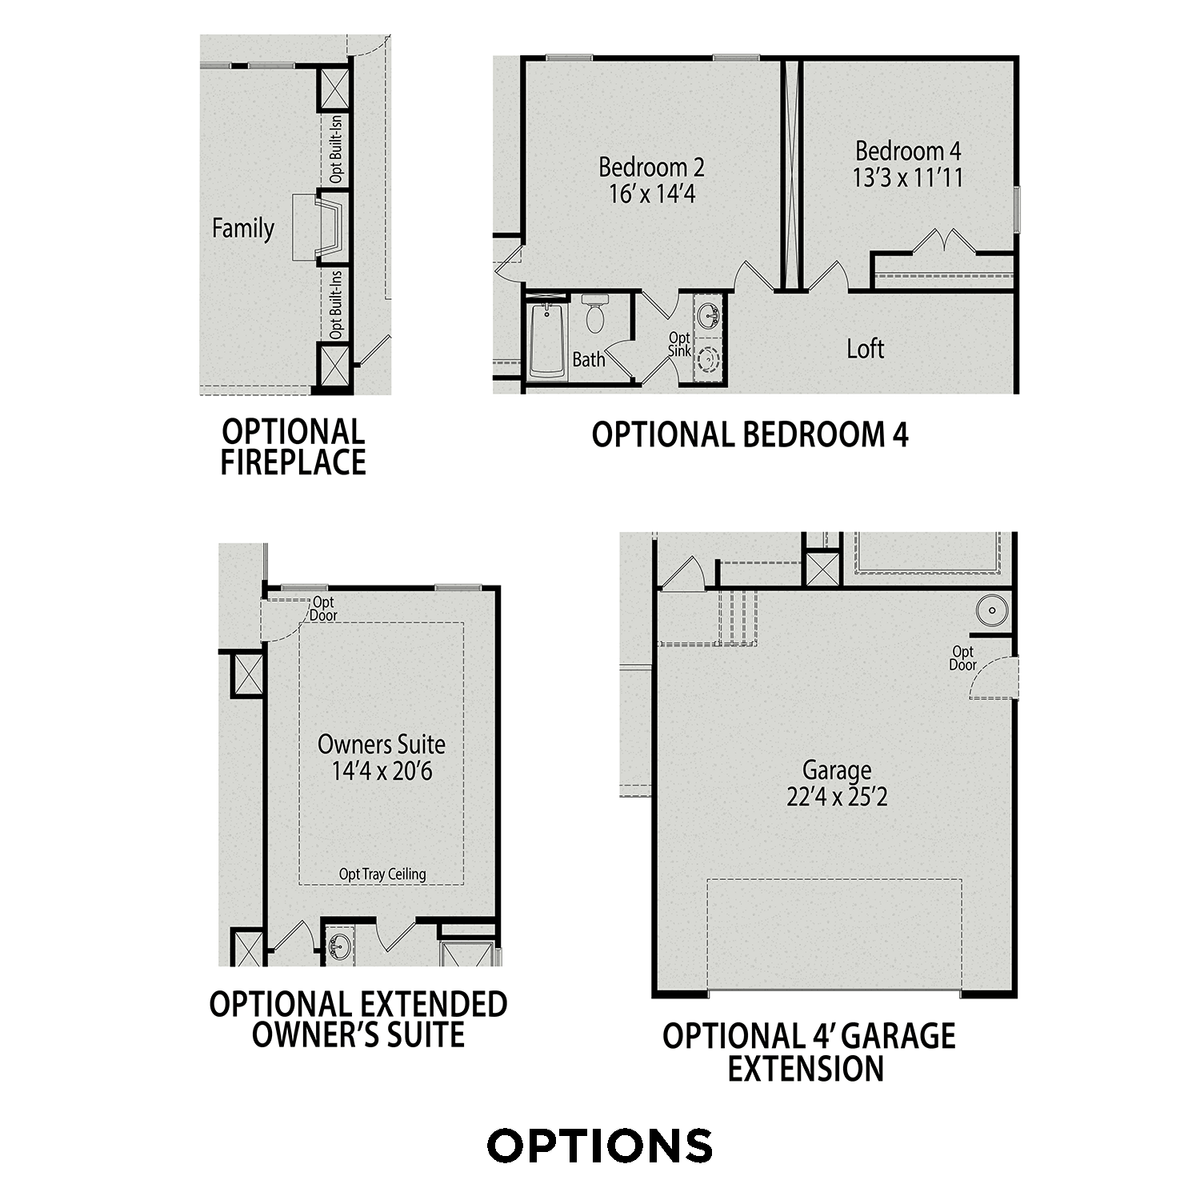 4 - The Cypress A buildable floor plan layout in Davidson Homes' Addison West community.